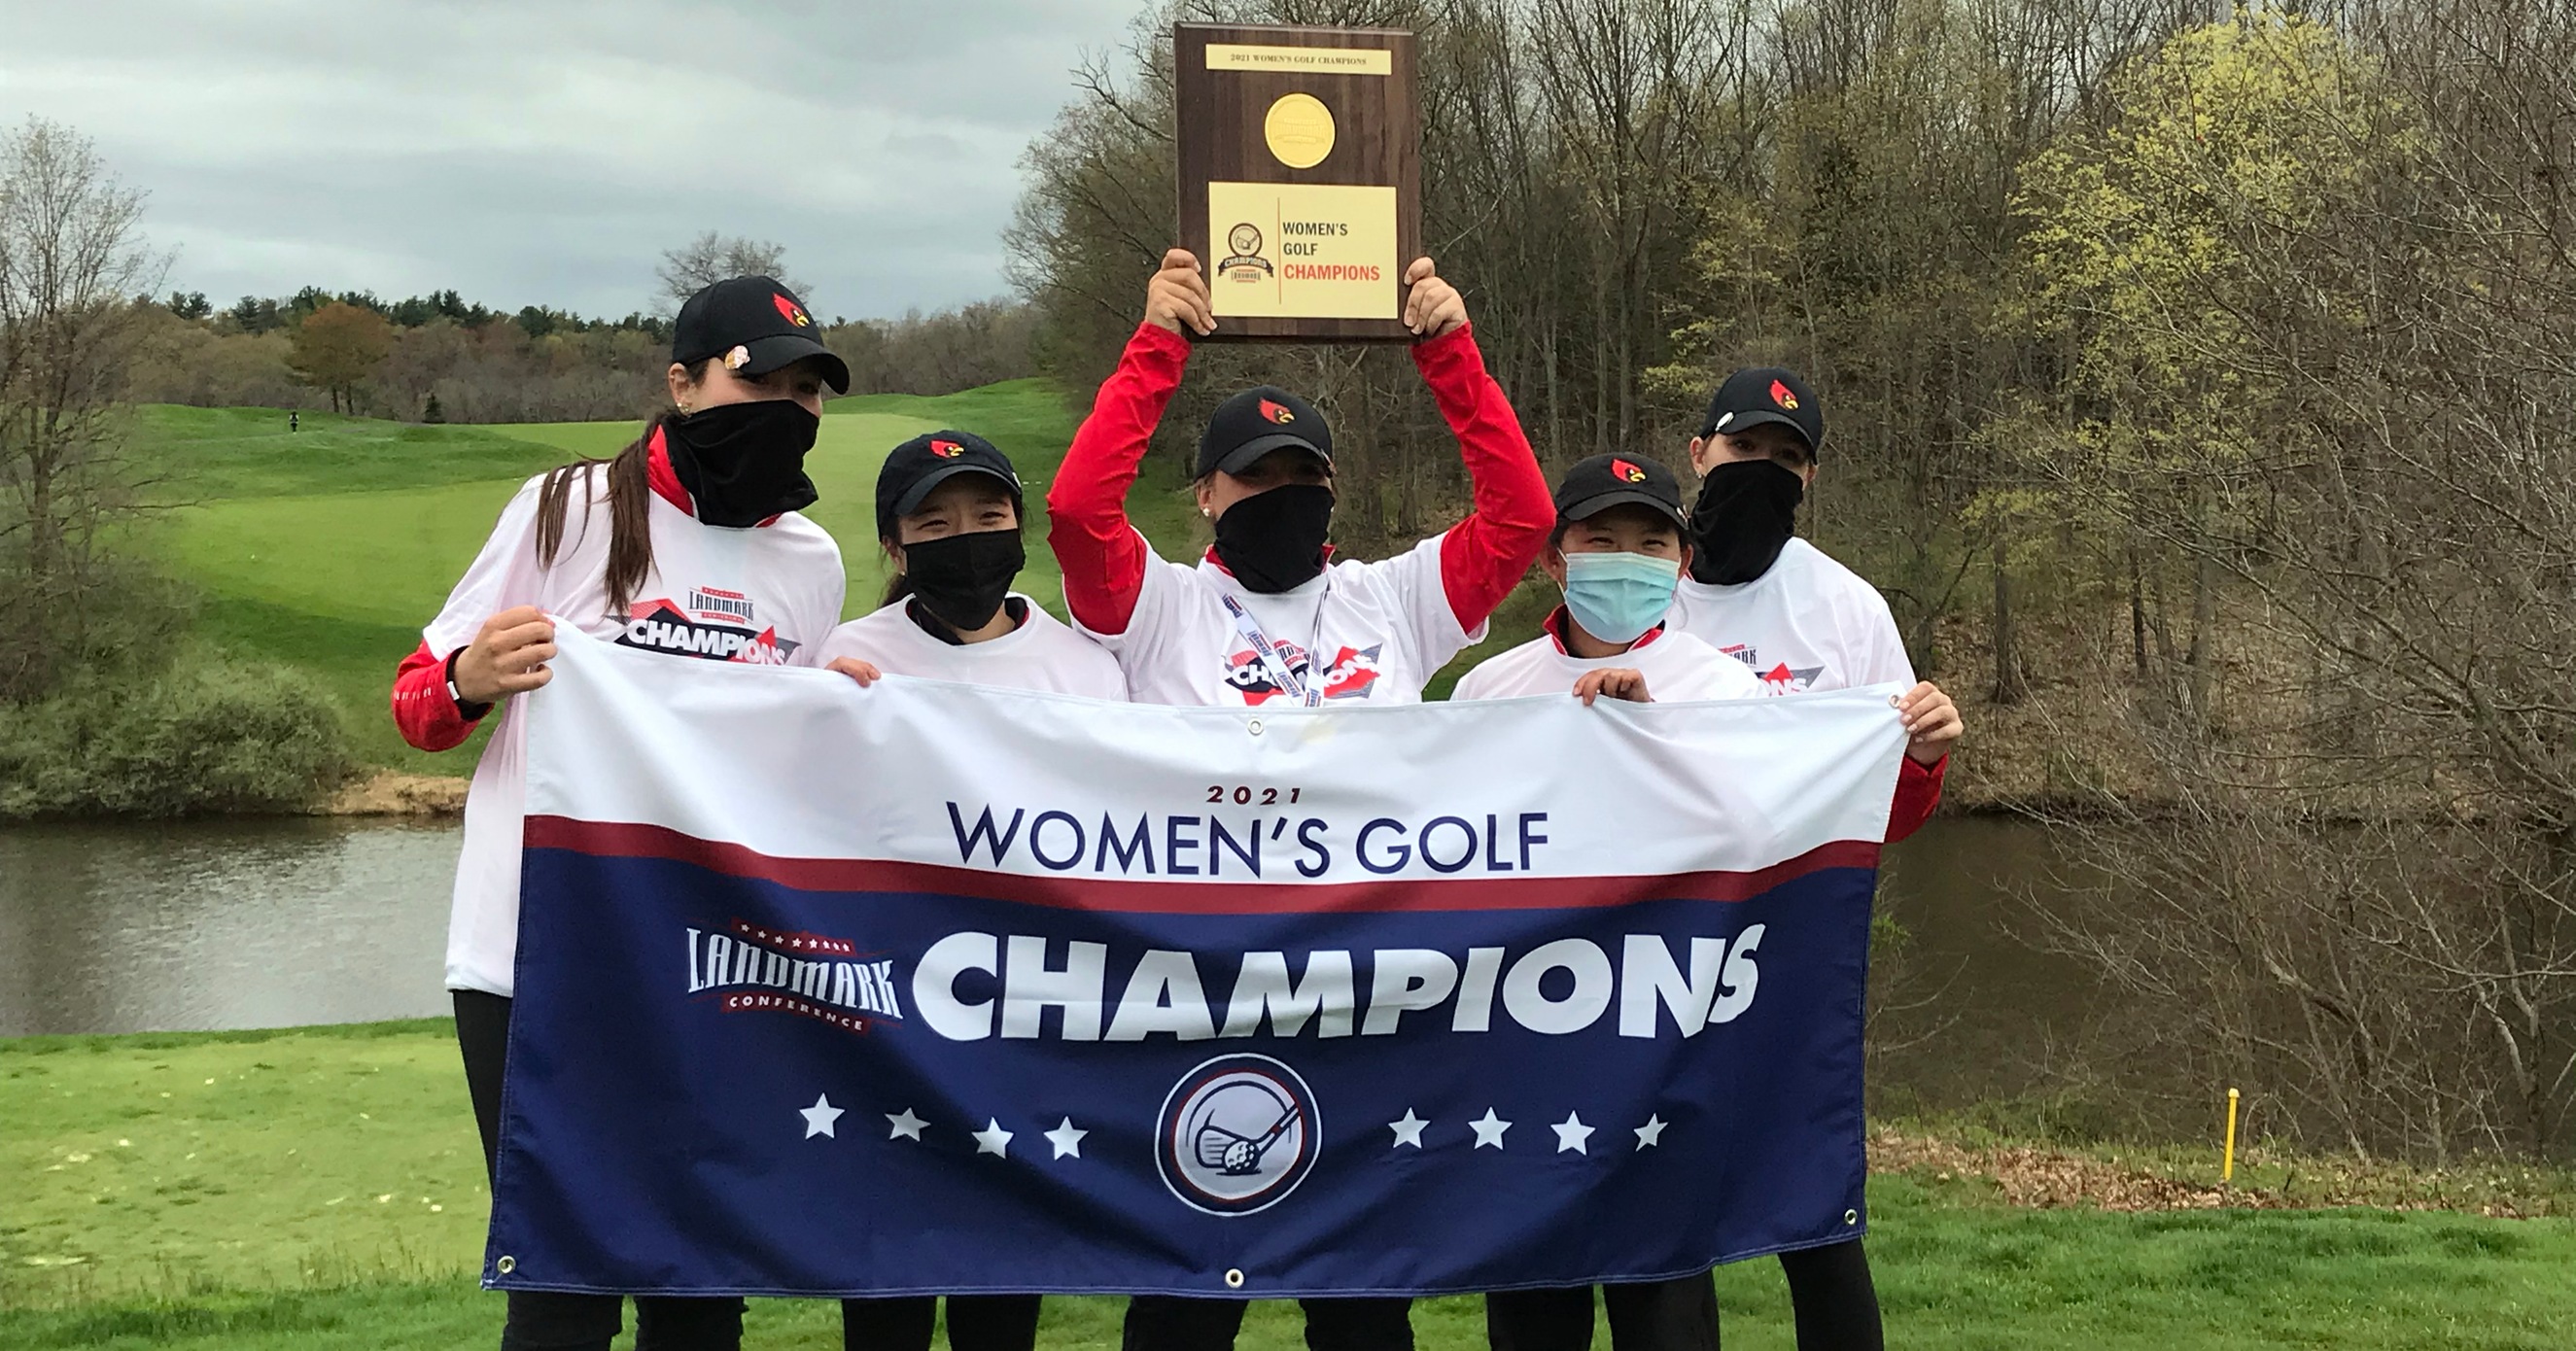 Women's golf team poses with championship banner